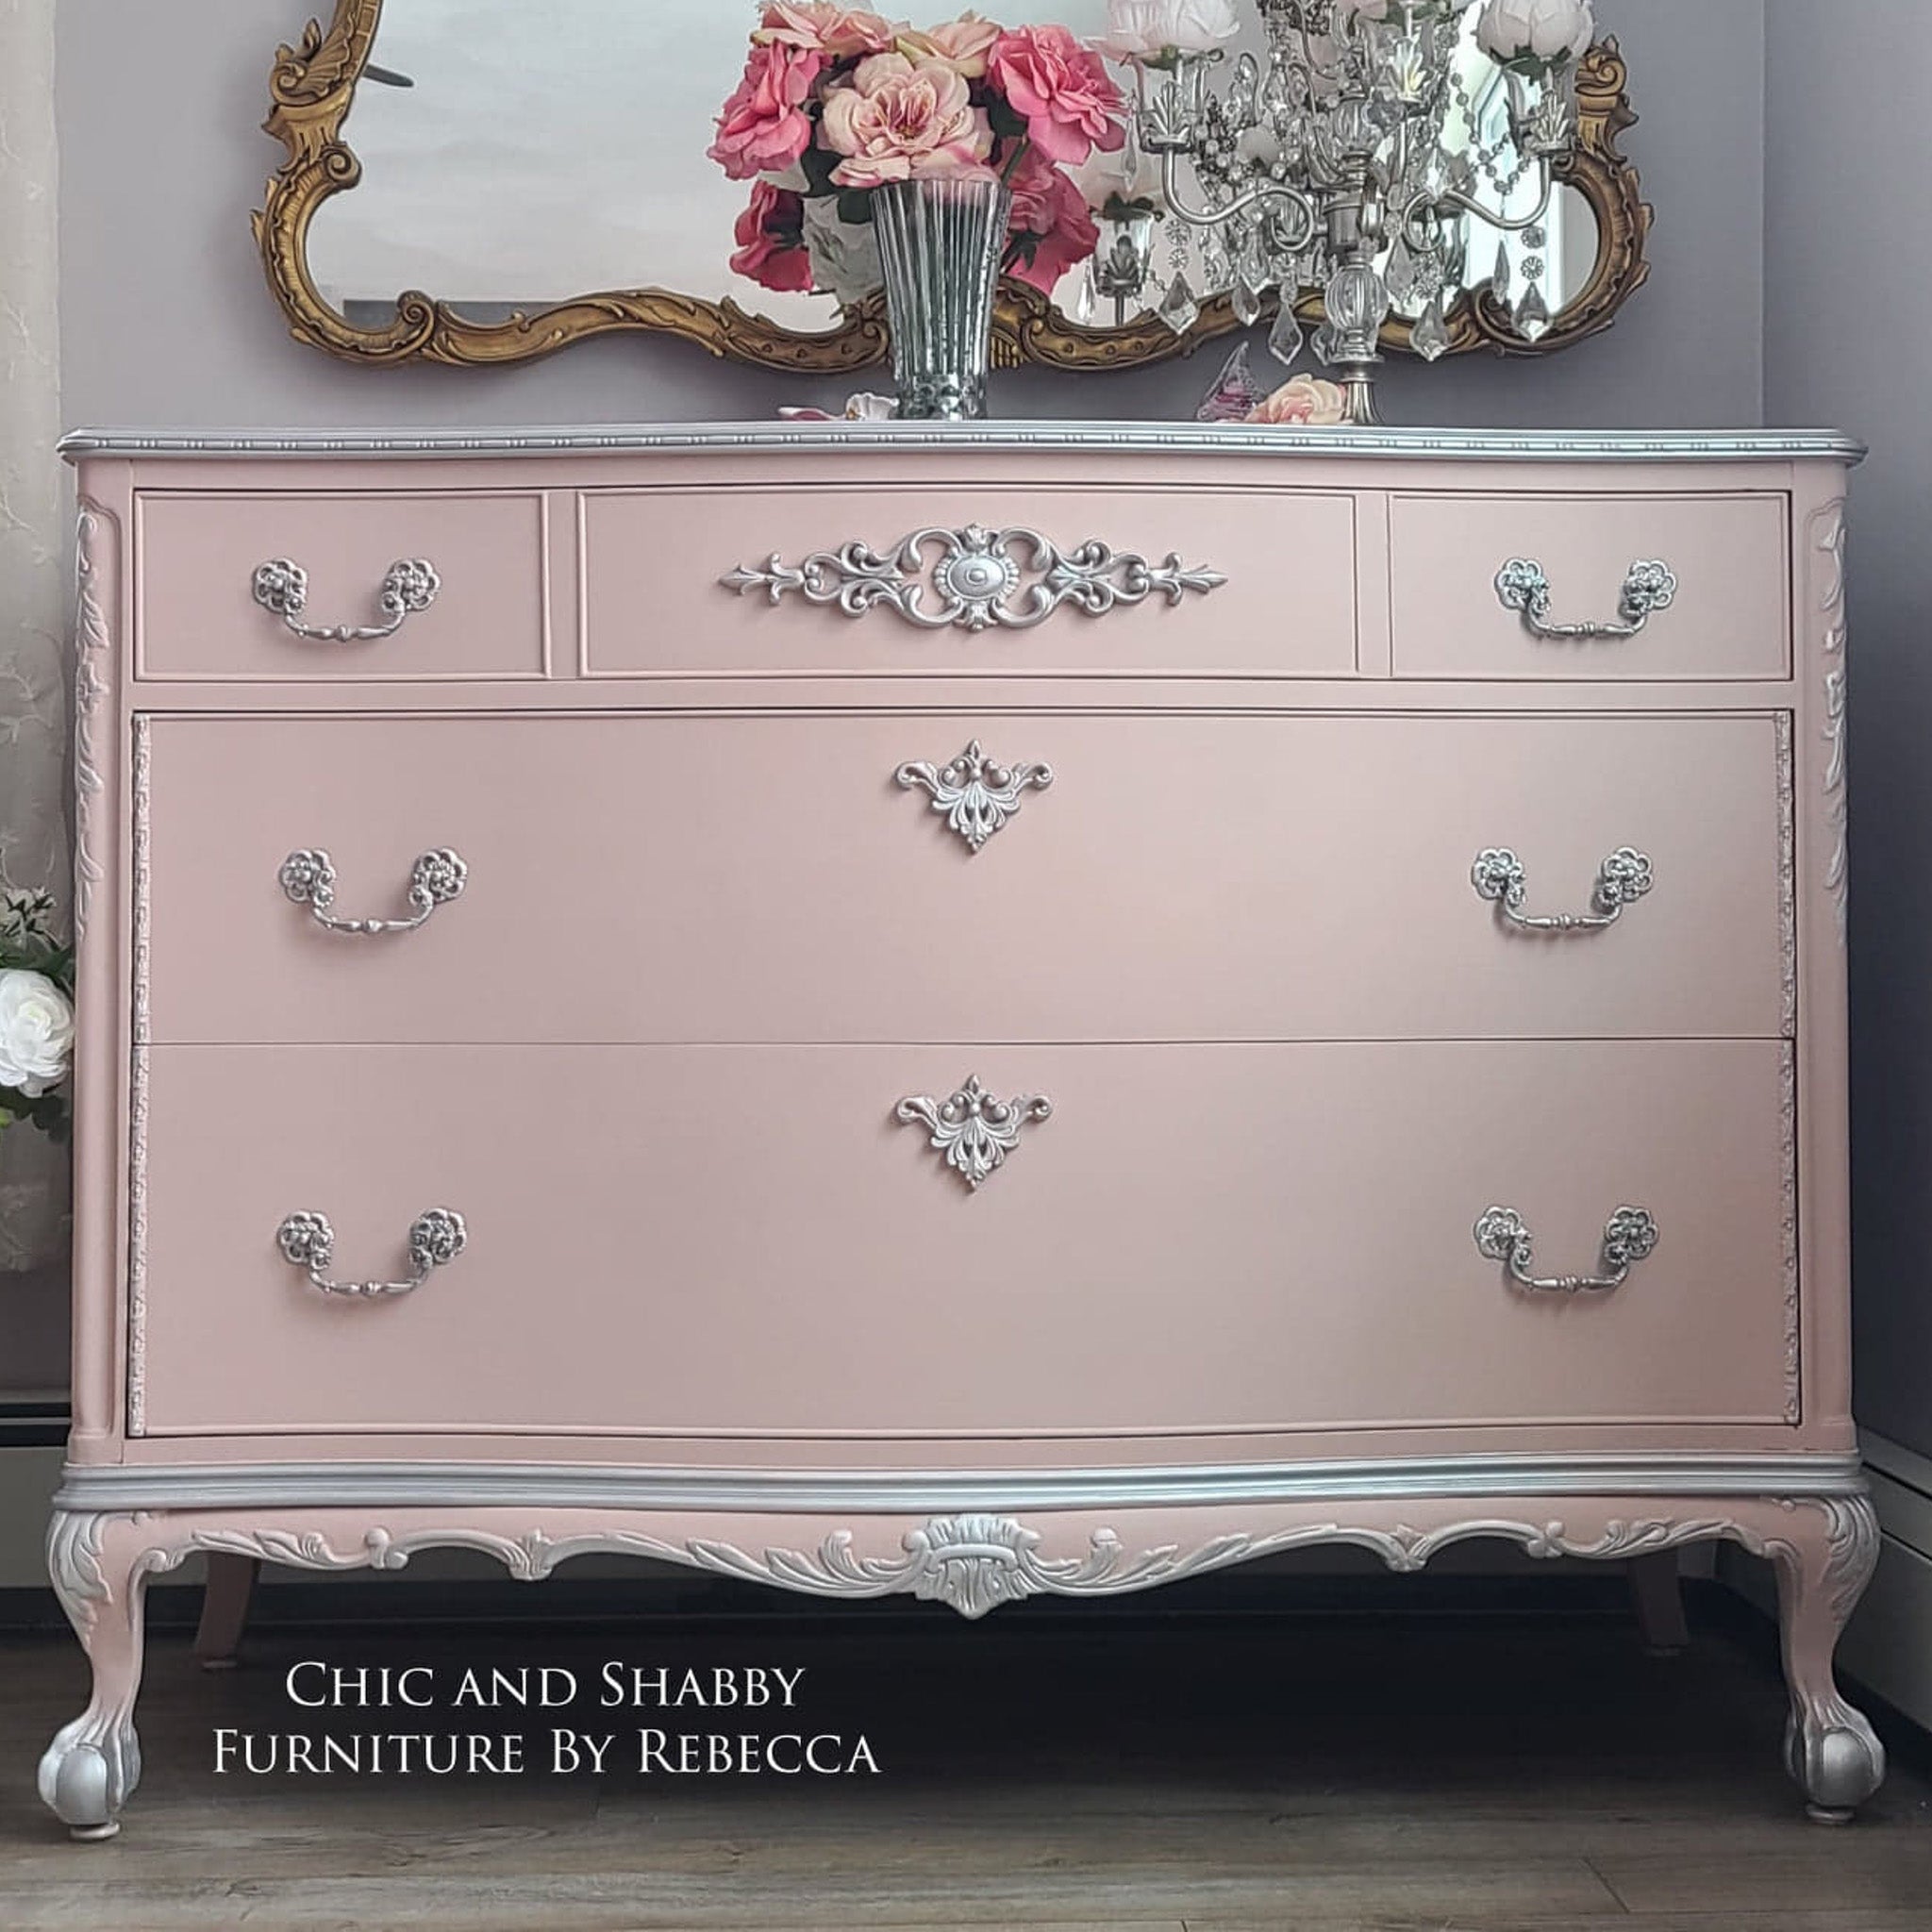 A vintage 5-drawer dresser refurbised by Chic and Shabby Furniture by Rebecca is painted in Dixie Belle's Tea Rose chalk mineral paint.